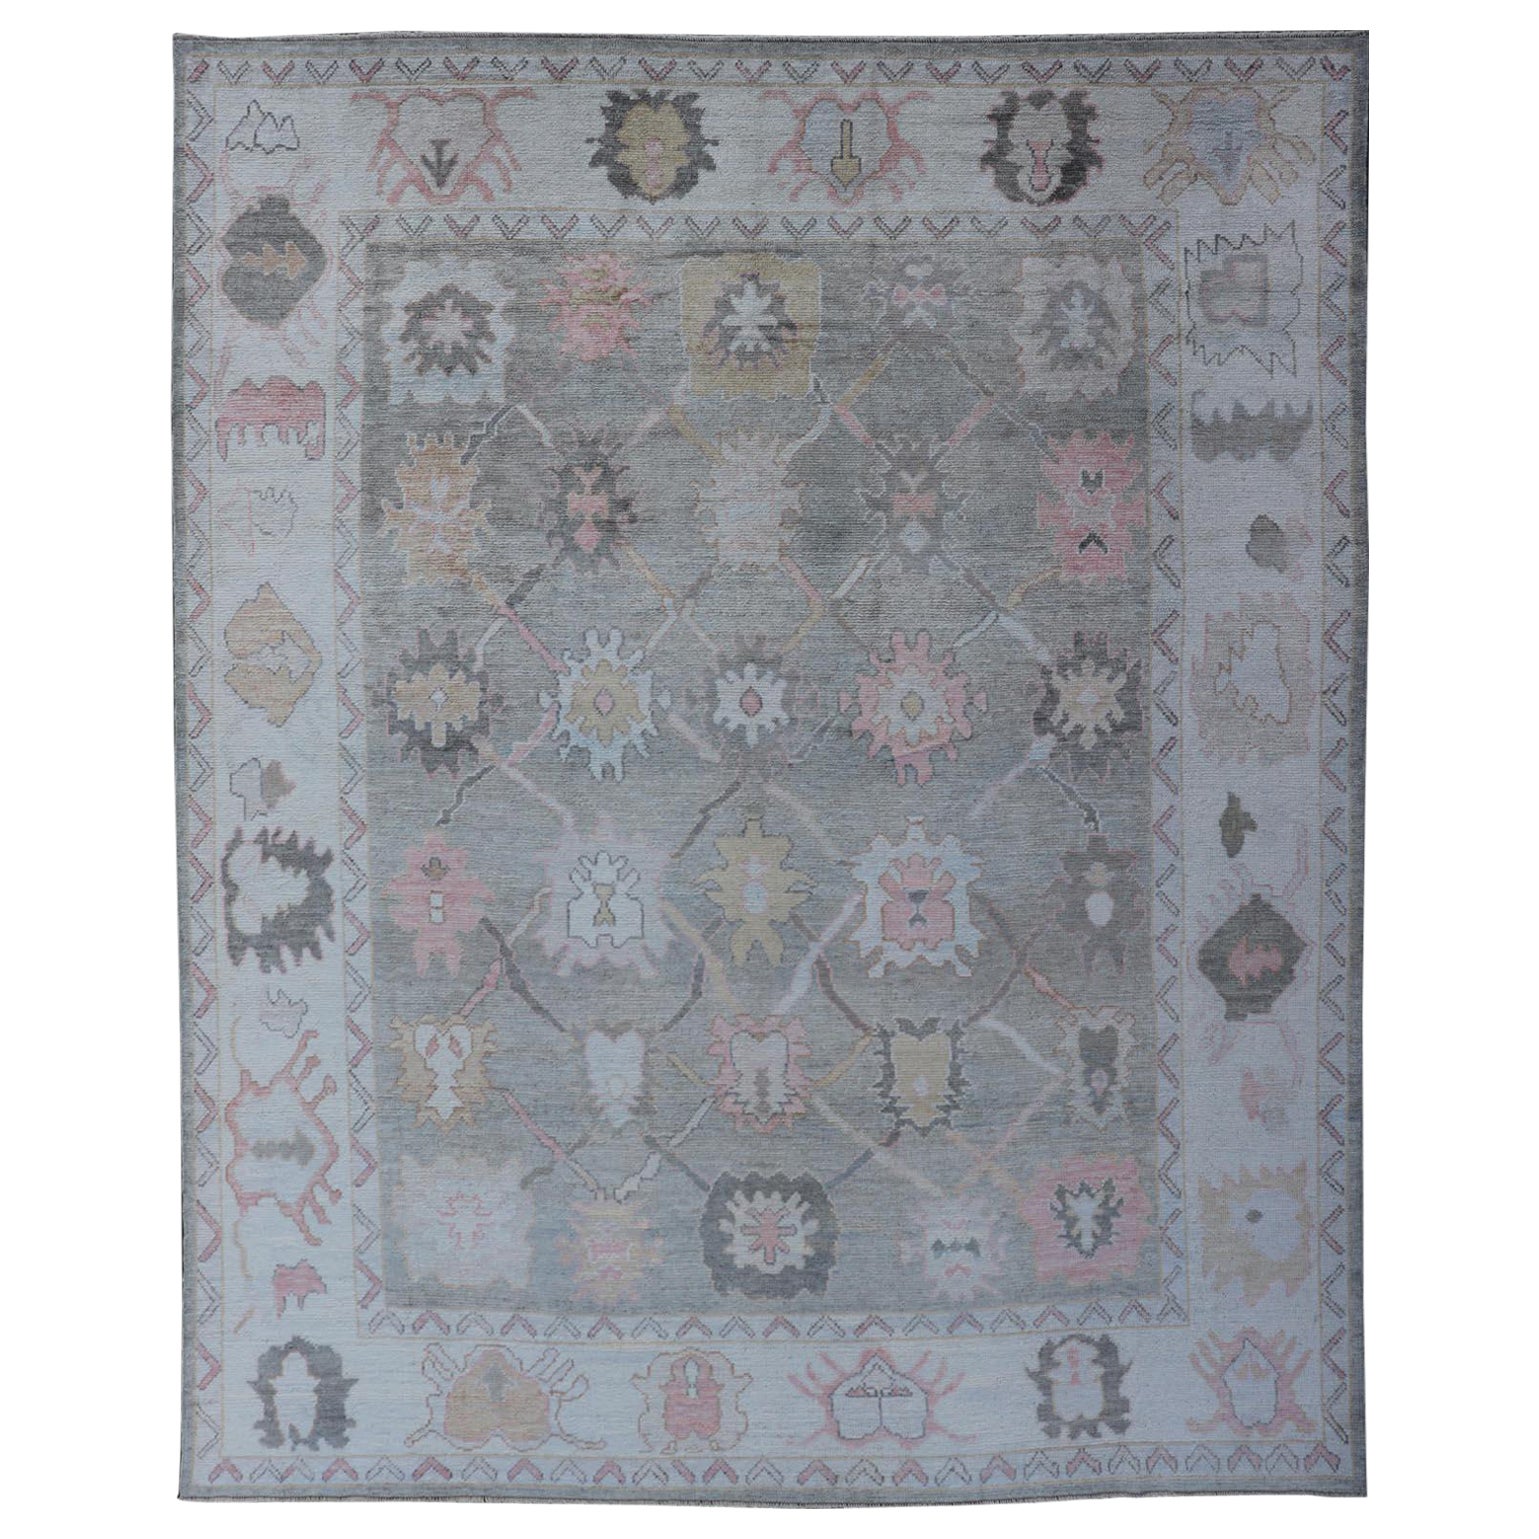 Tribal Design Turkish Oushak Rug with Medallions in Light Green and Multi Colors